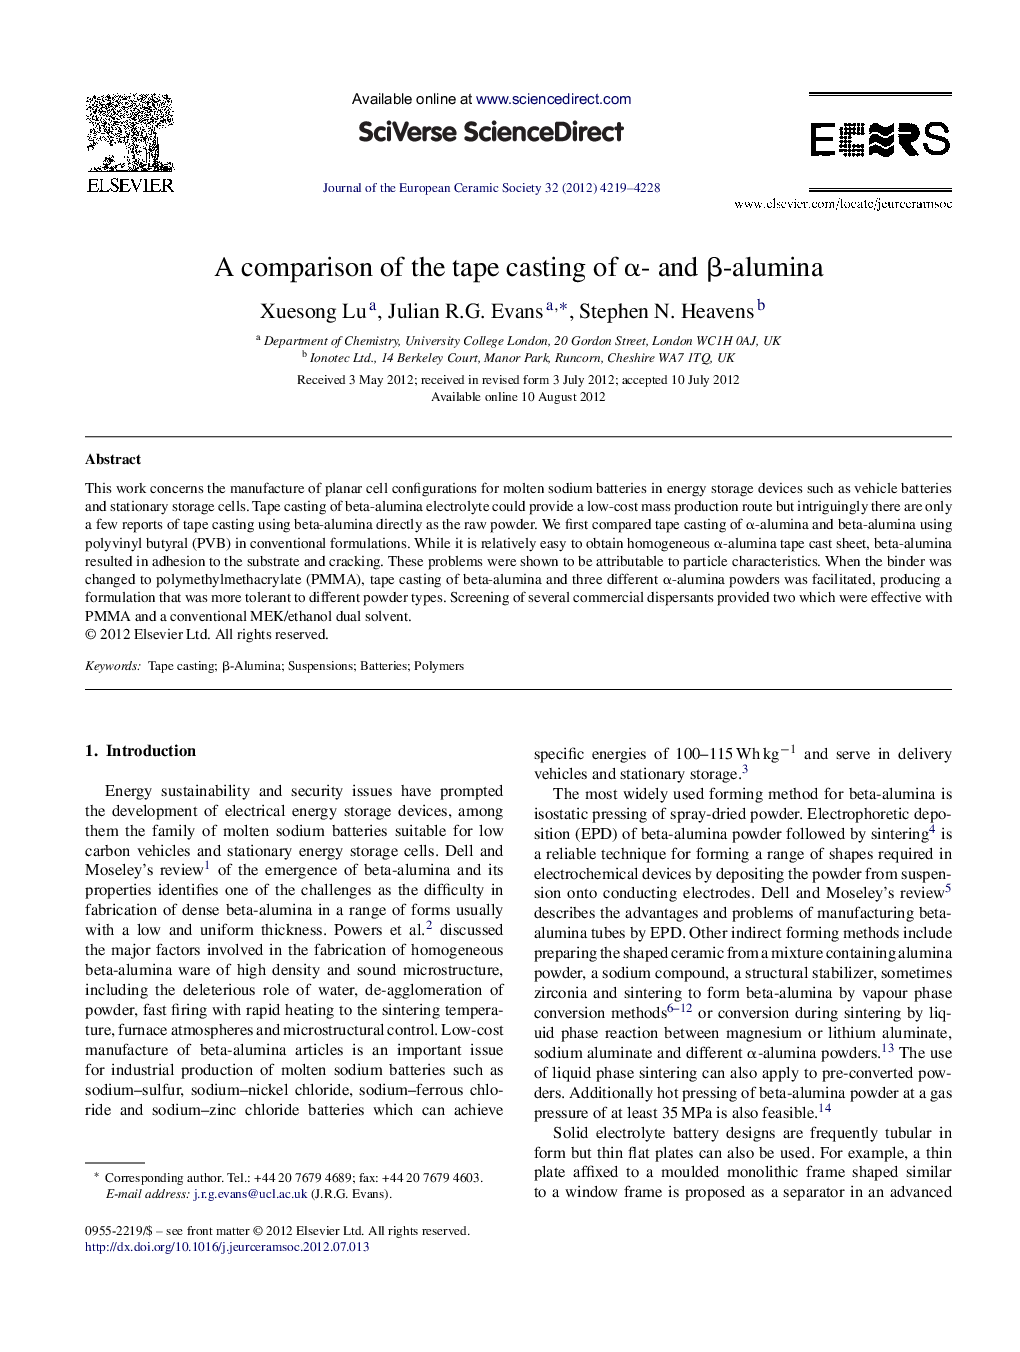 A comparison of the tape casting of α- and β-alumina